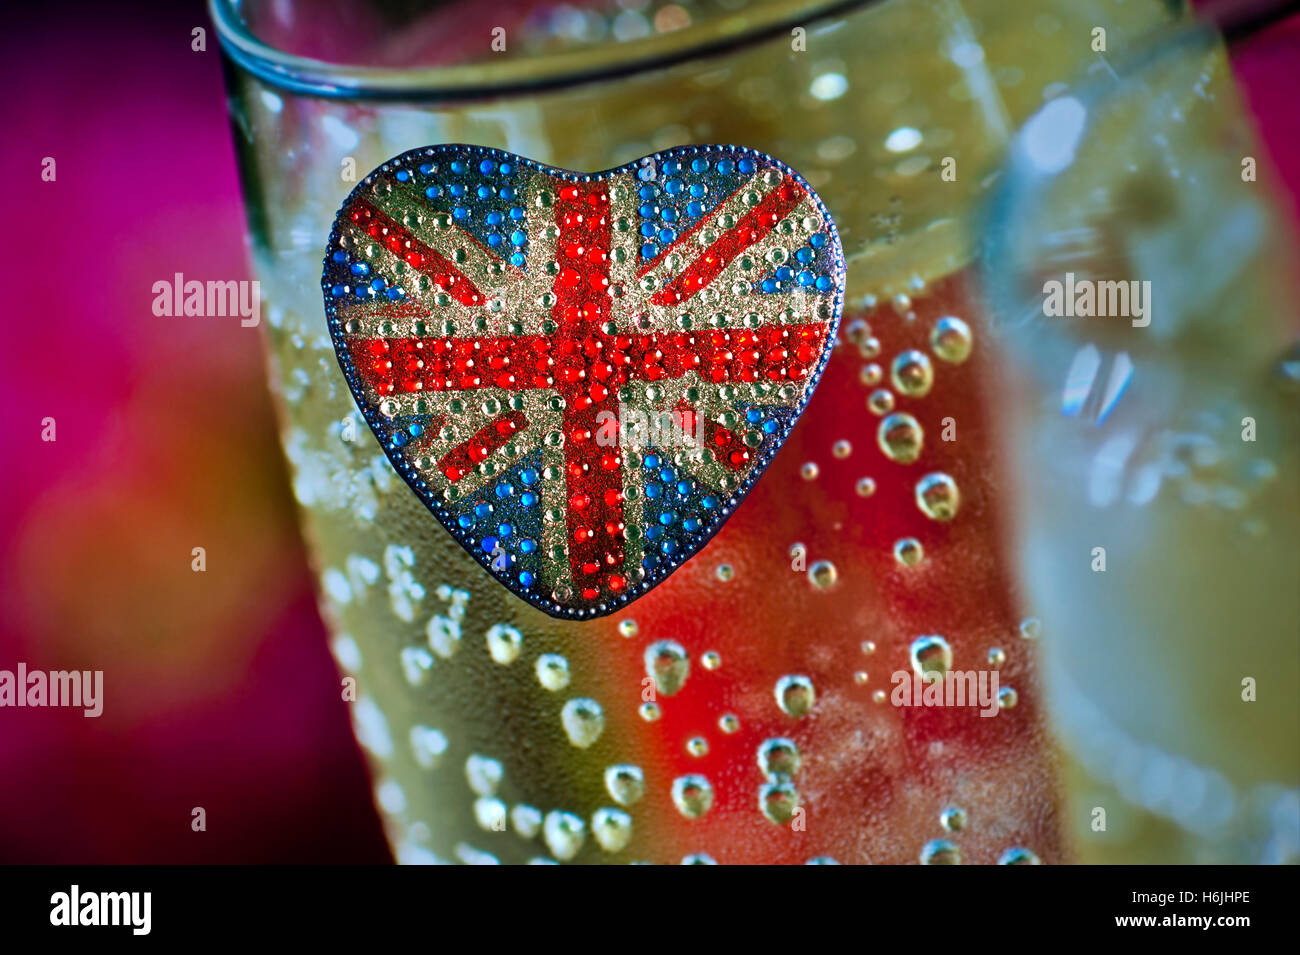 Concept heart shaped reflective sparkling Union Jack Flag motif with glasses of English sparkling wine behind Stock Photo